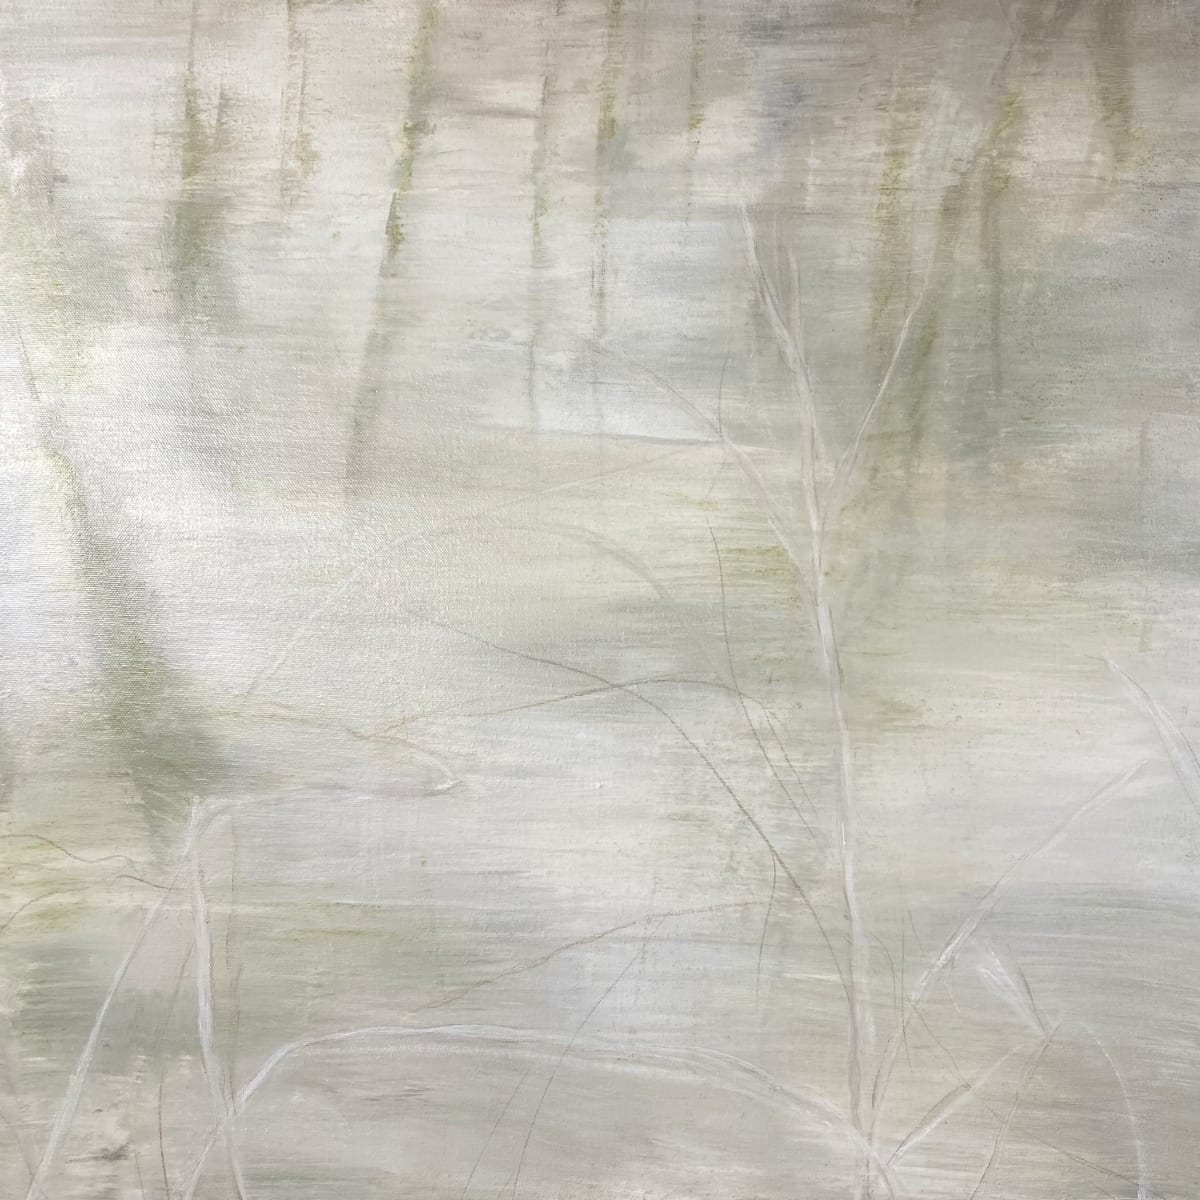 2198, Juanita Bellavance, White on white, From the Chestatee River portfolio, 2021, Acrylic on canvas, 24 x 24 inches 